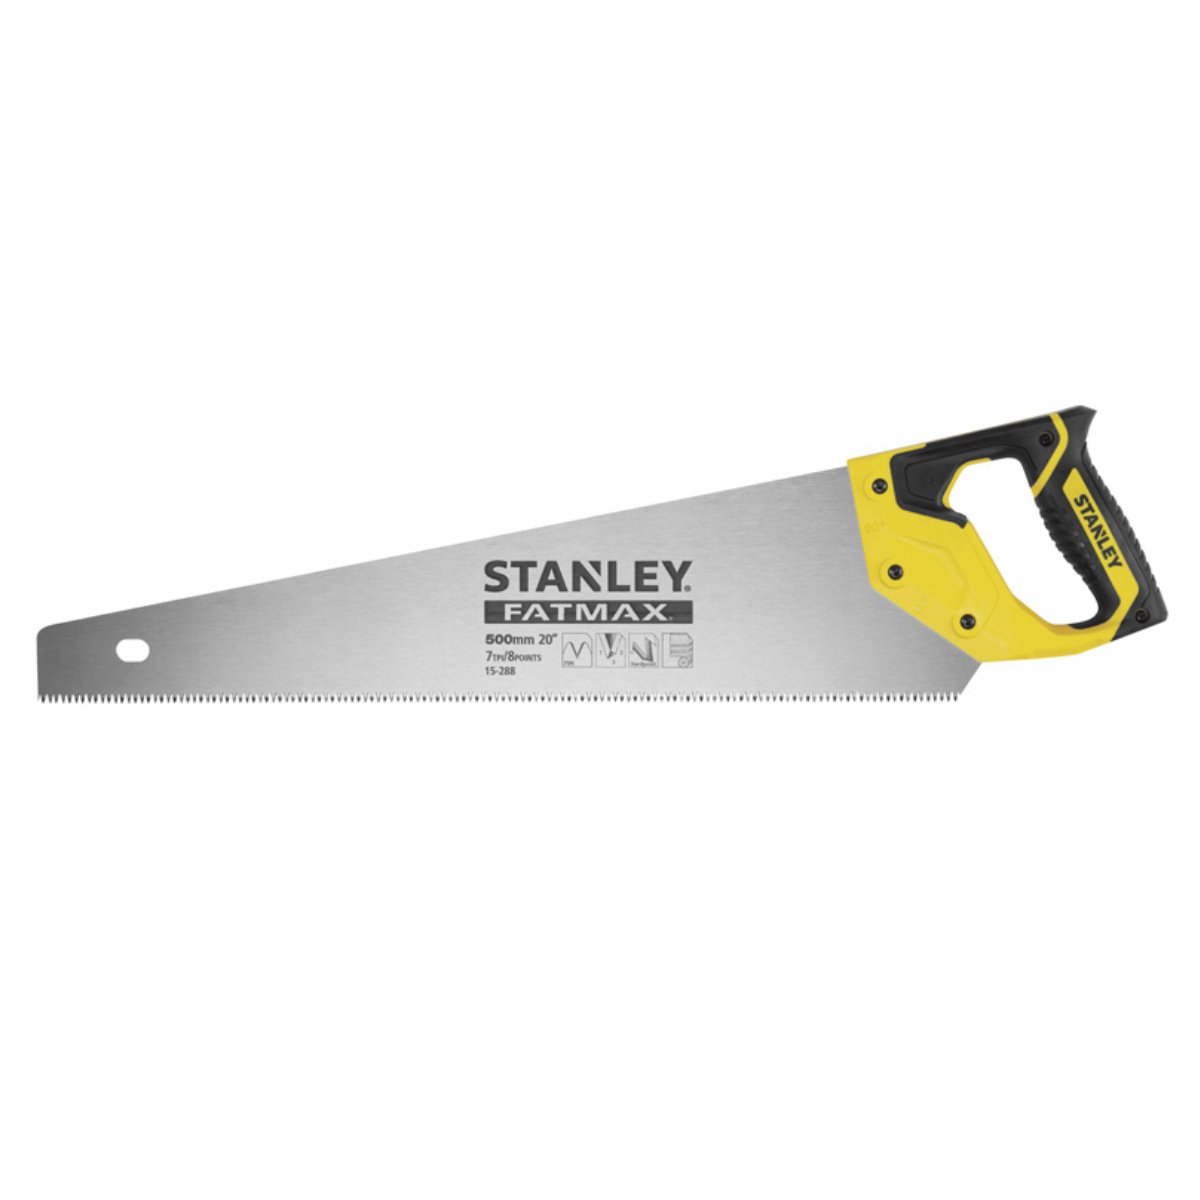 Stanley FatMax Jetcut Wood Saw 500mm 7TPI 2-15-288 Power Tool Services